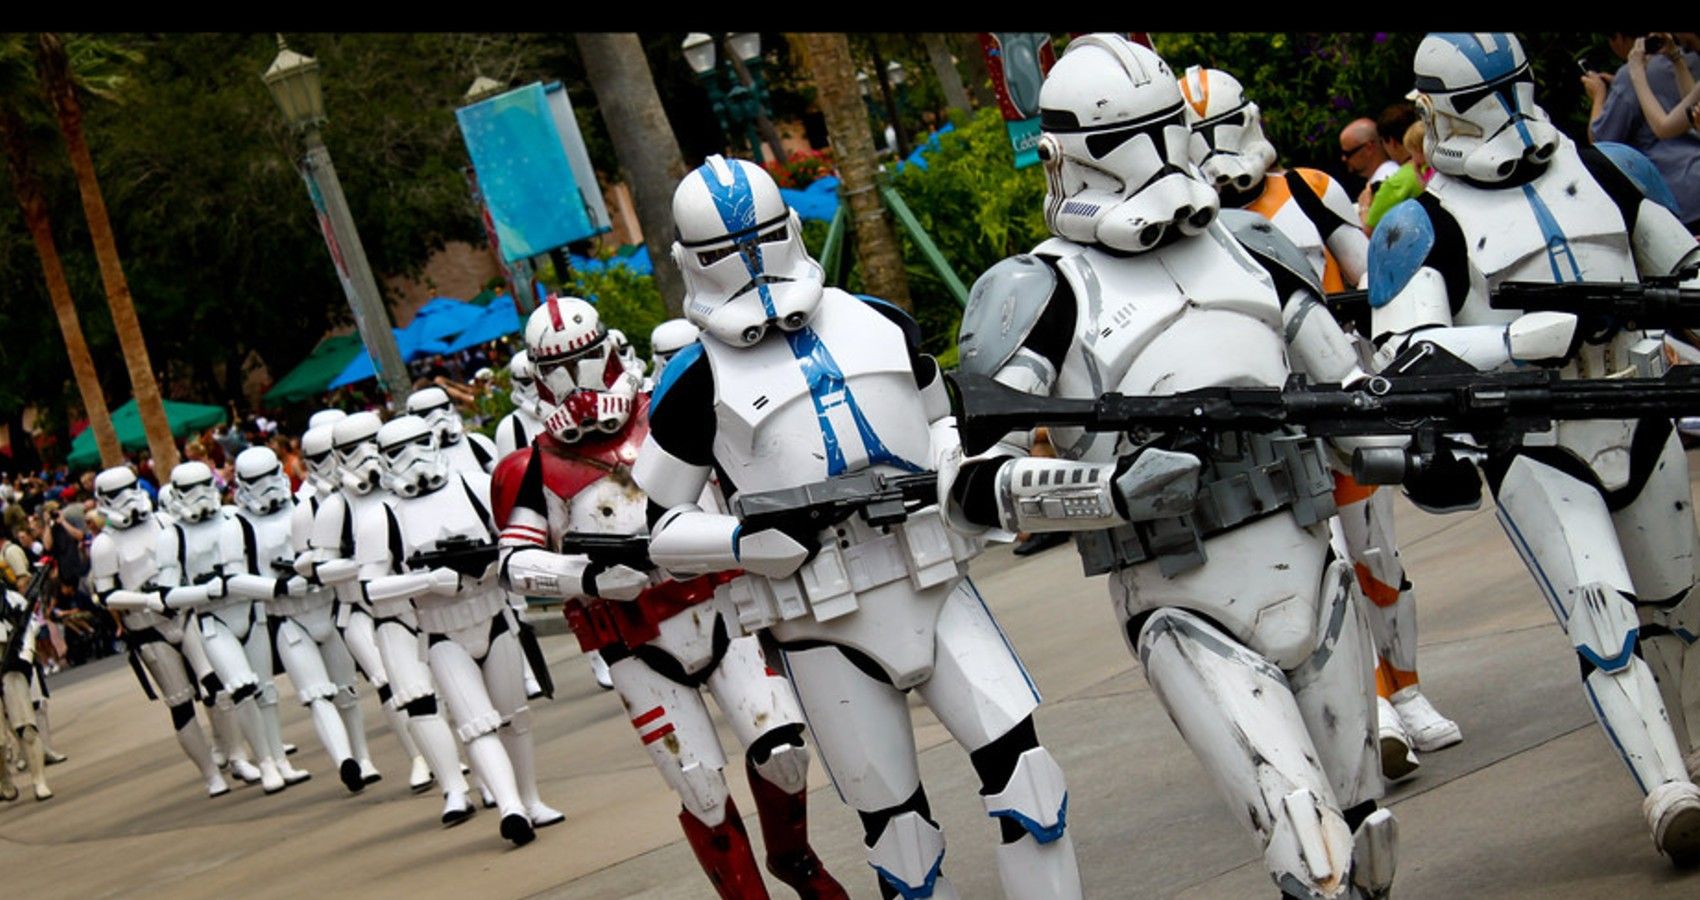 A parade of storm troopers walking outside